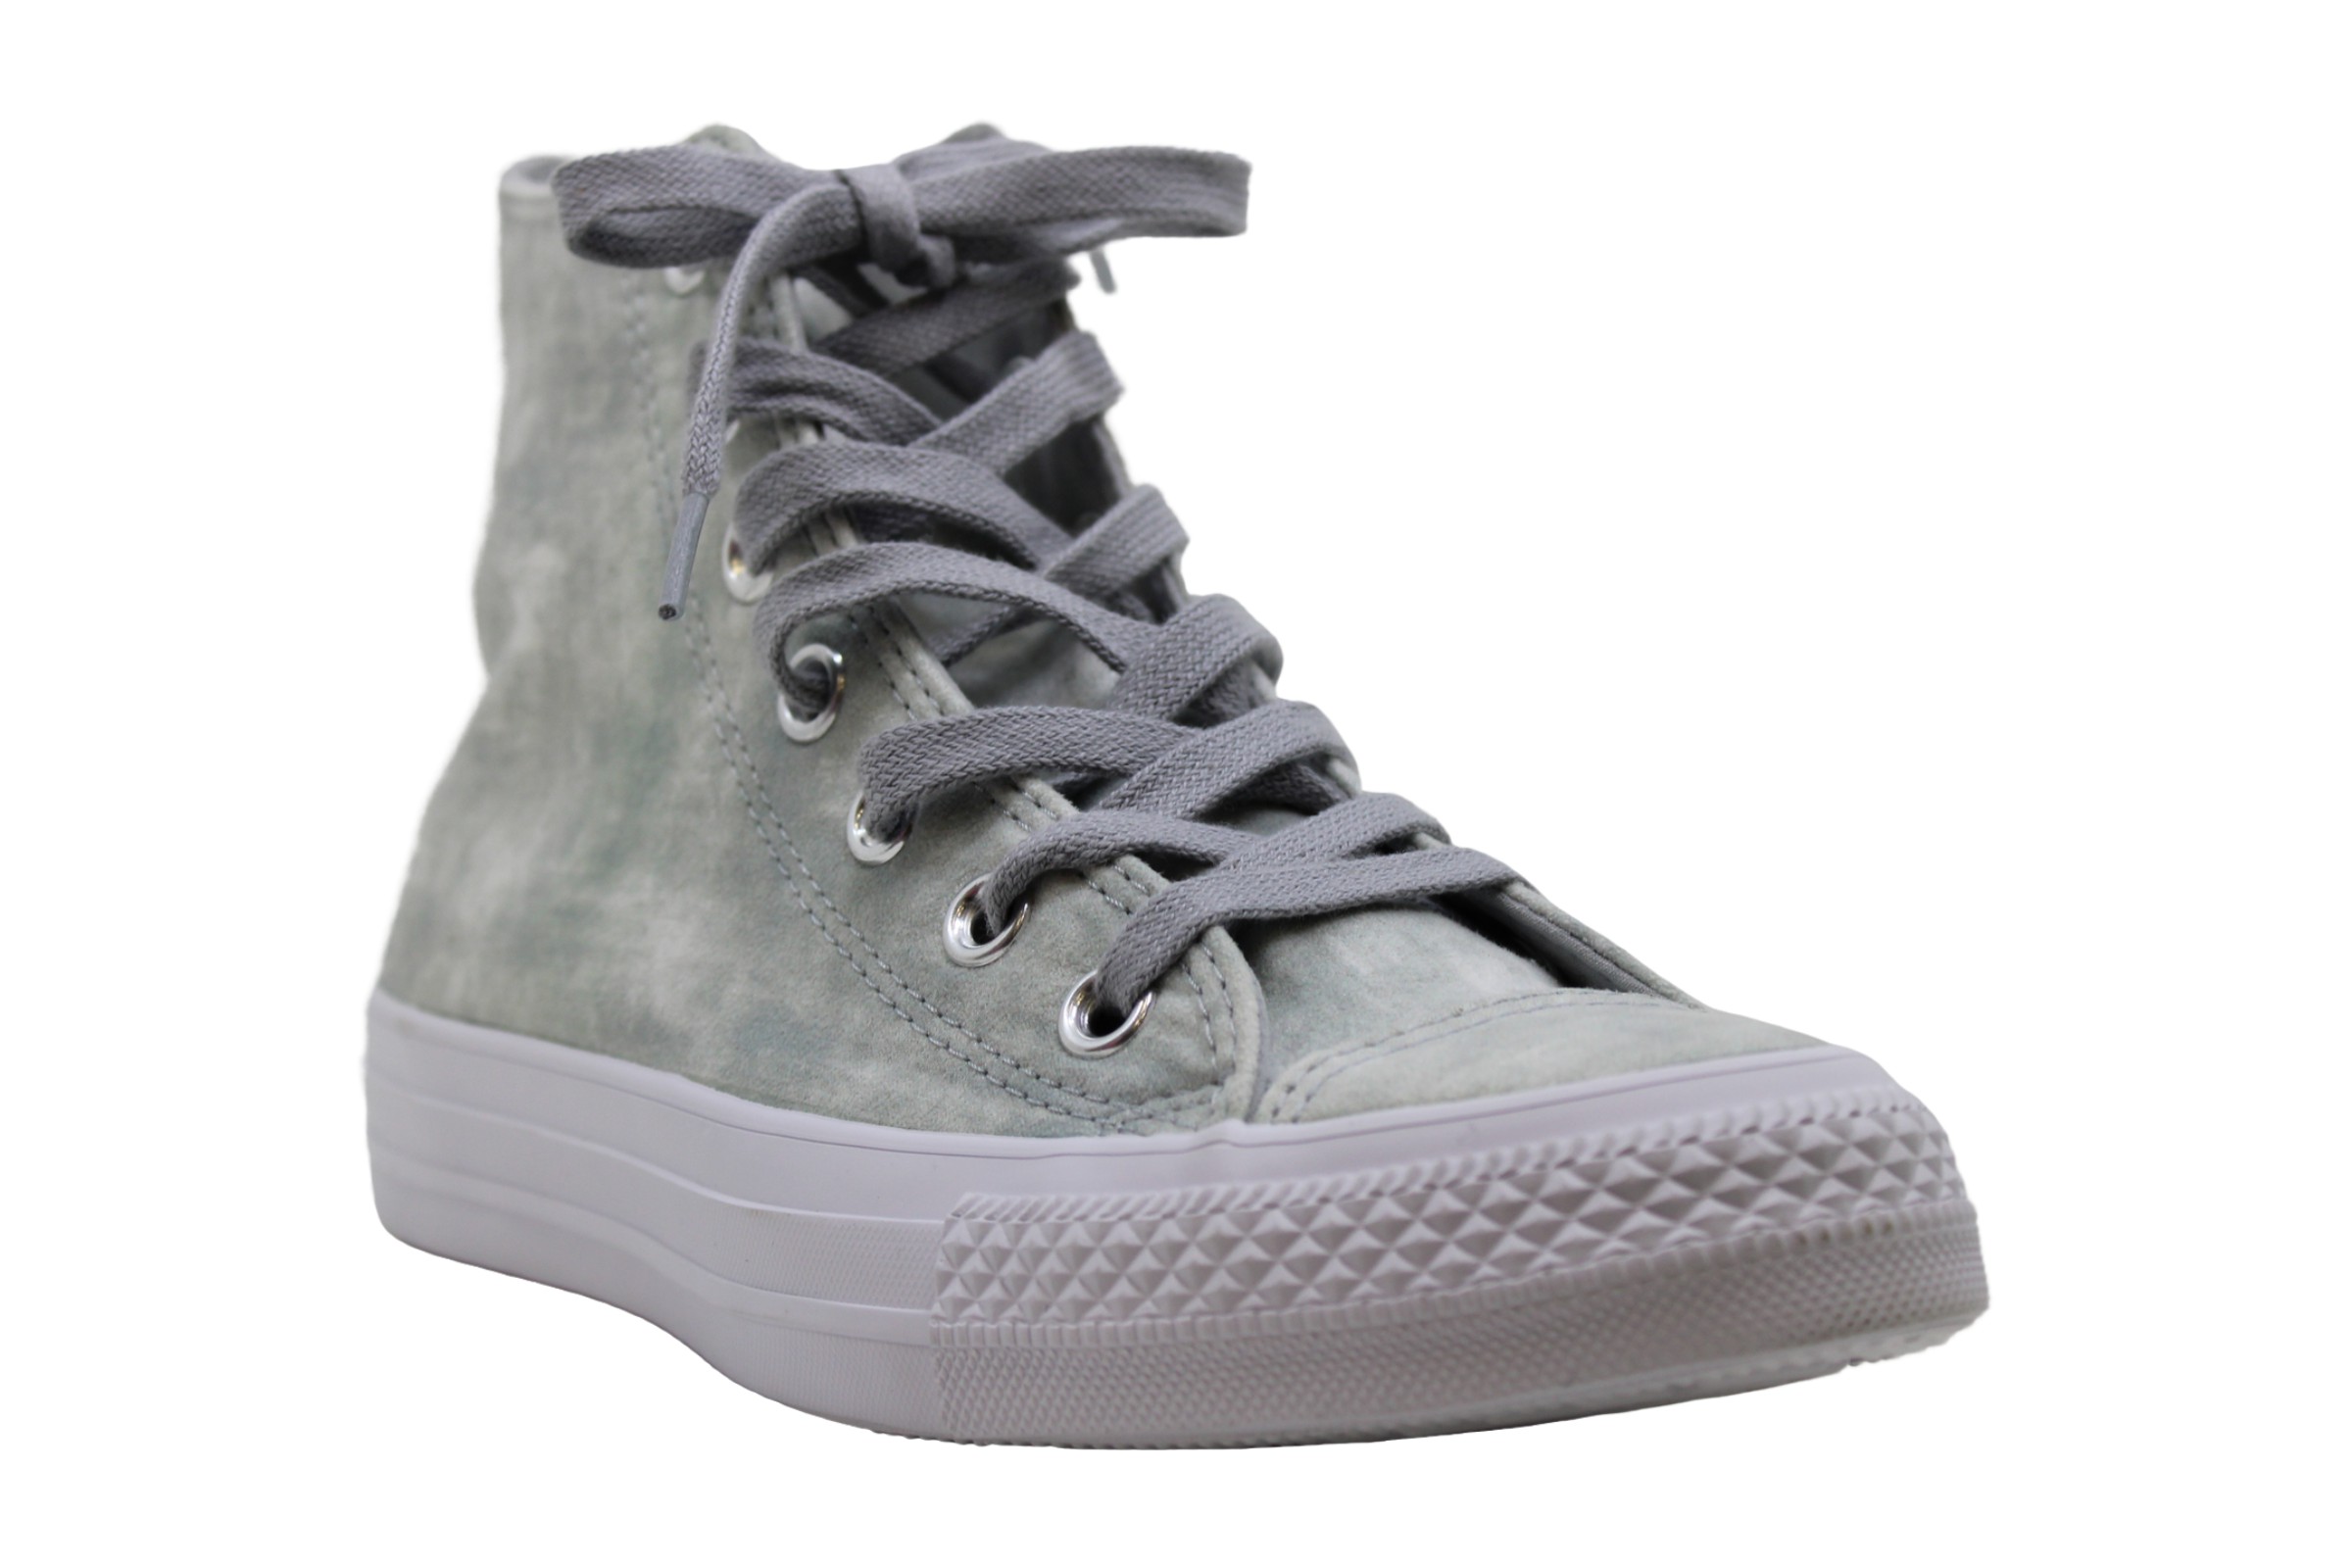 Converse Mens Ctas hi Hight Top Lace Up Fashion Sneakers, Grey, Size 4. ...